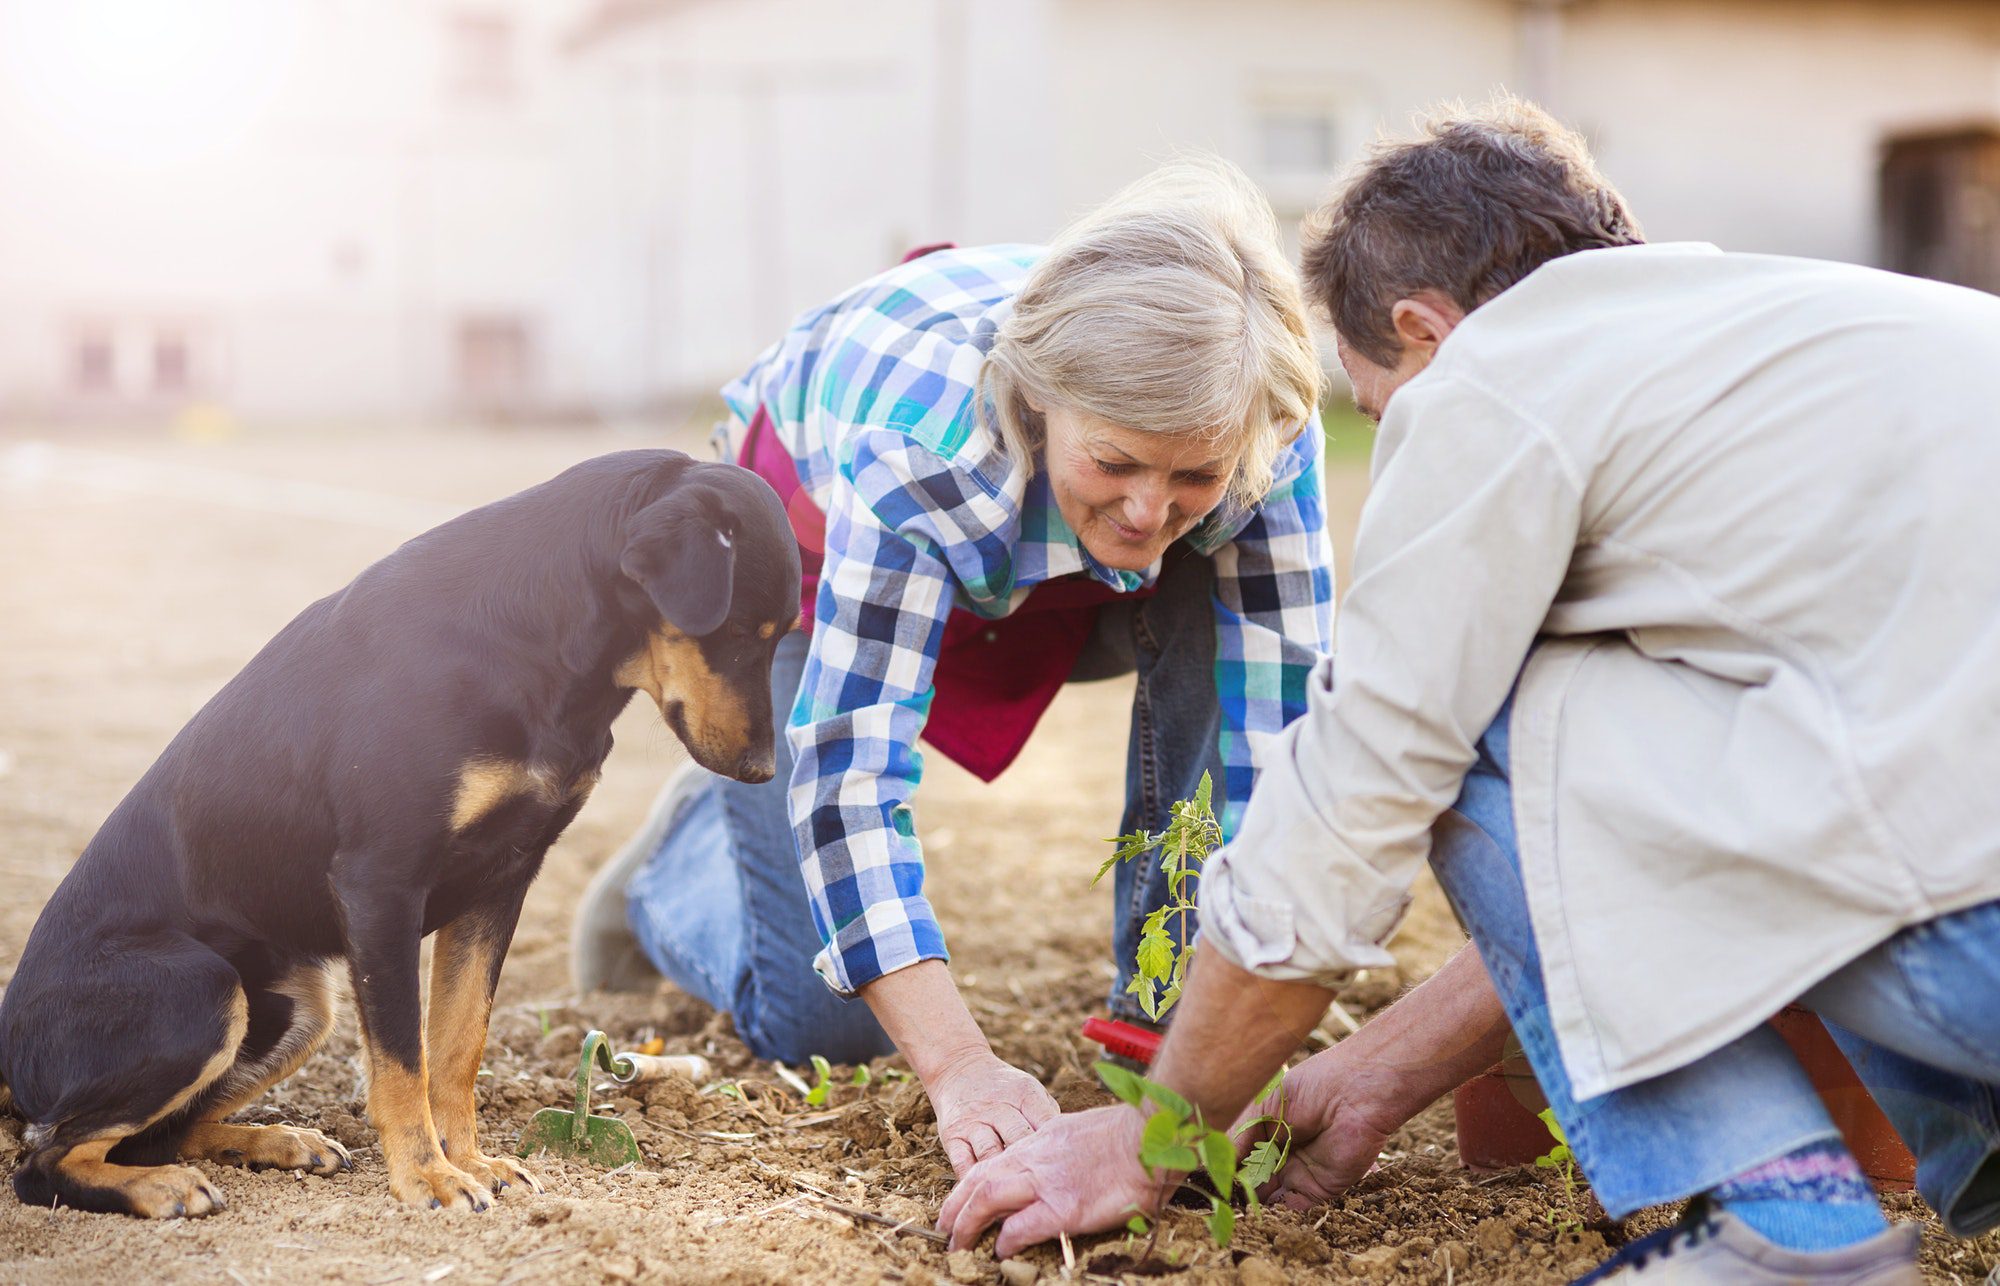 Senior couple gardening as their dog looks on and they discuss 2022 medicare costs.